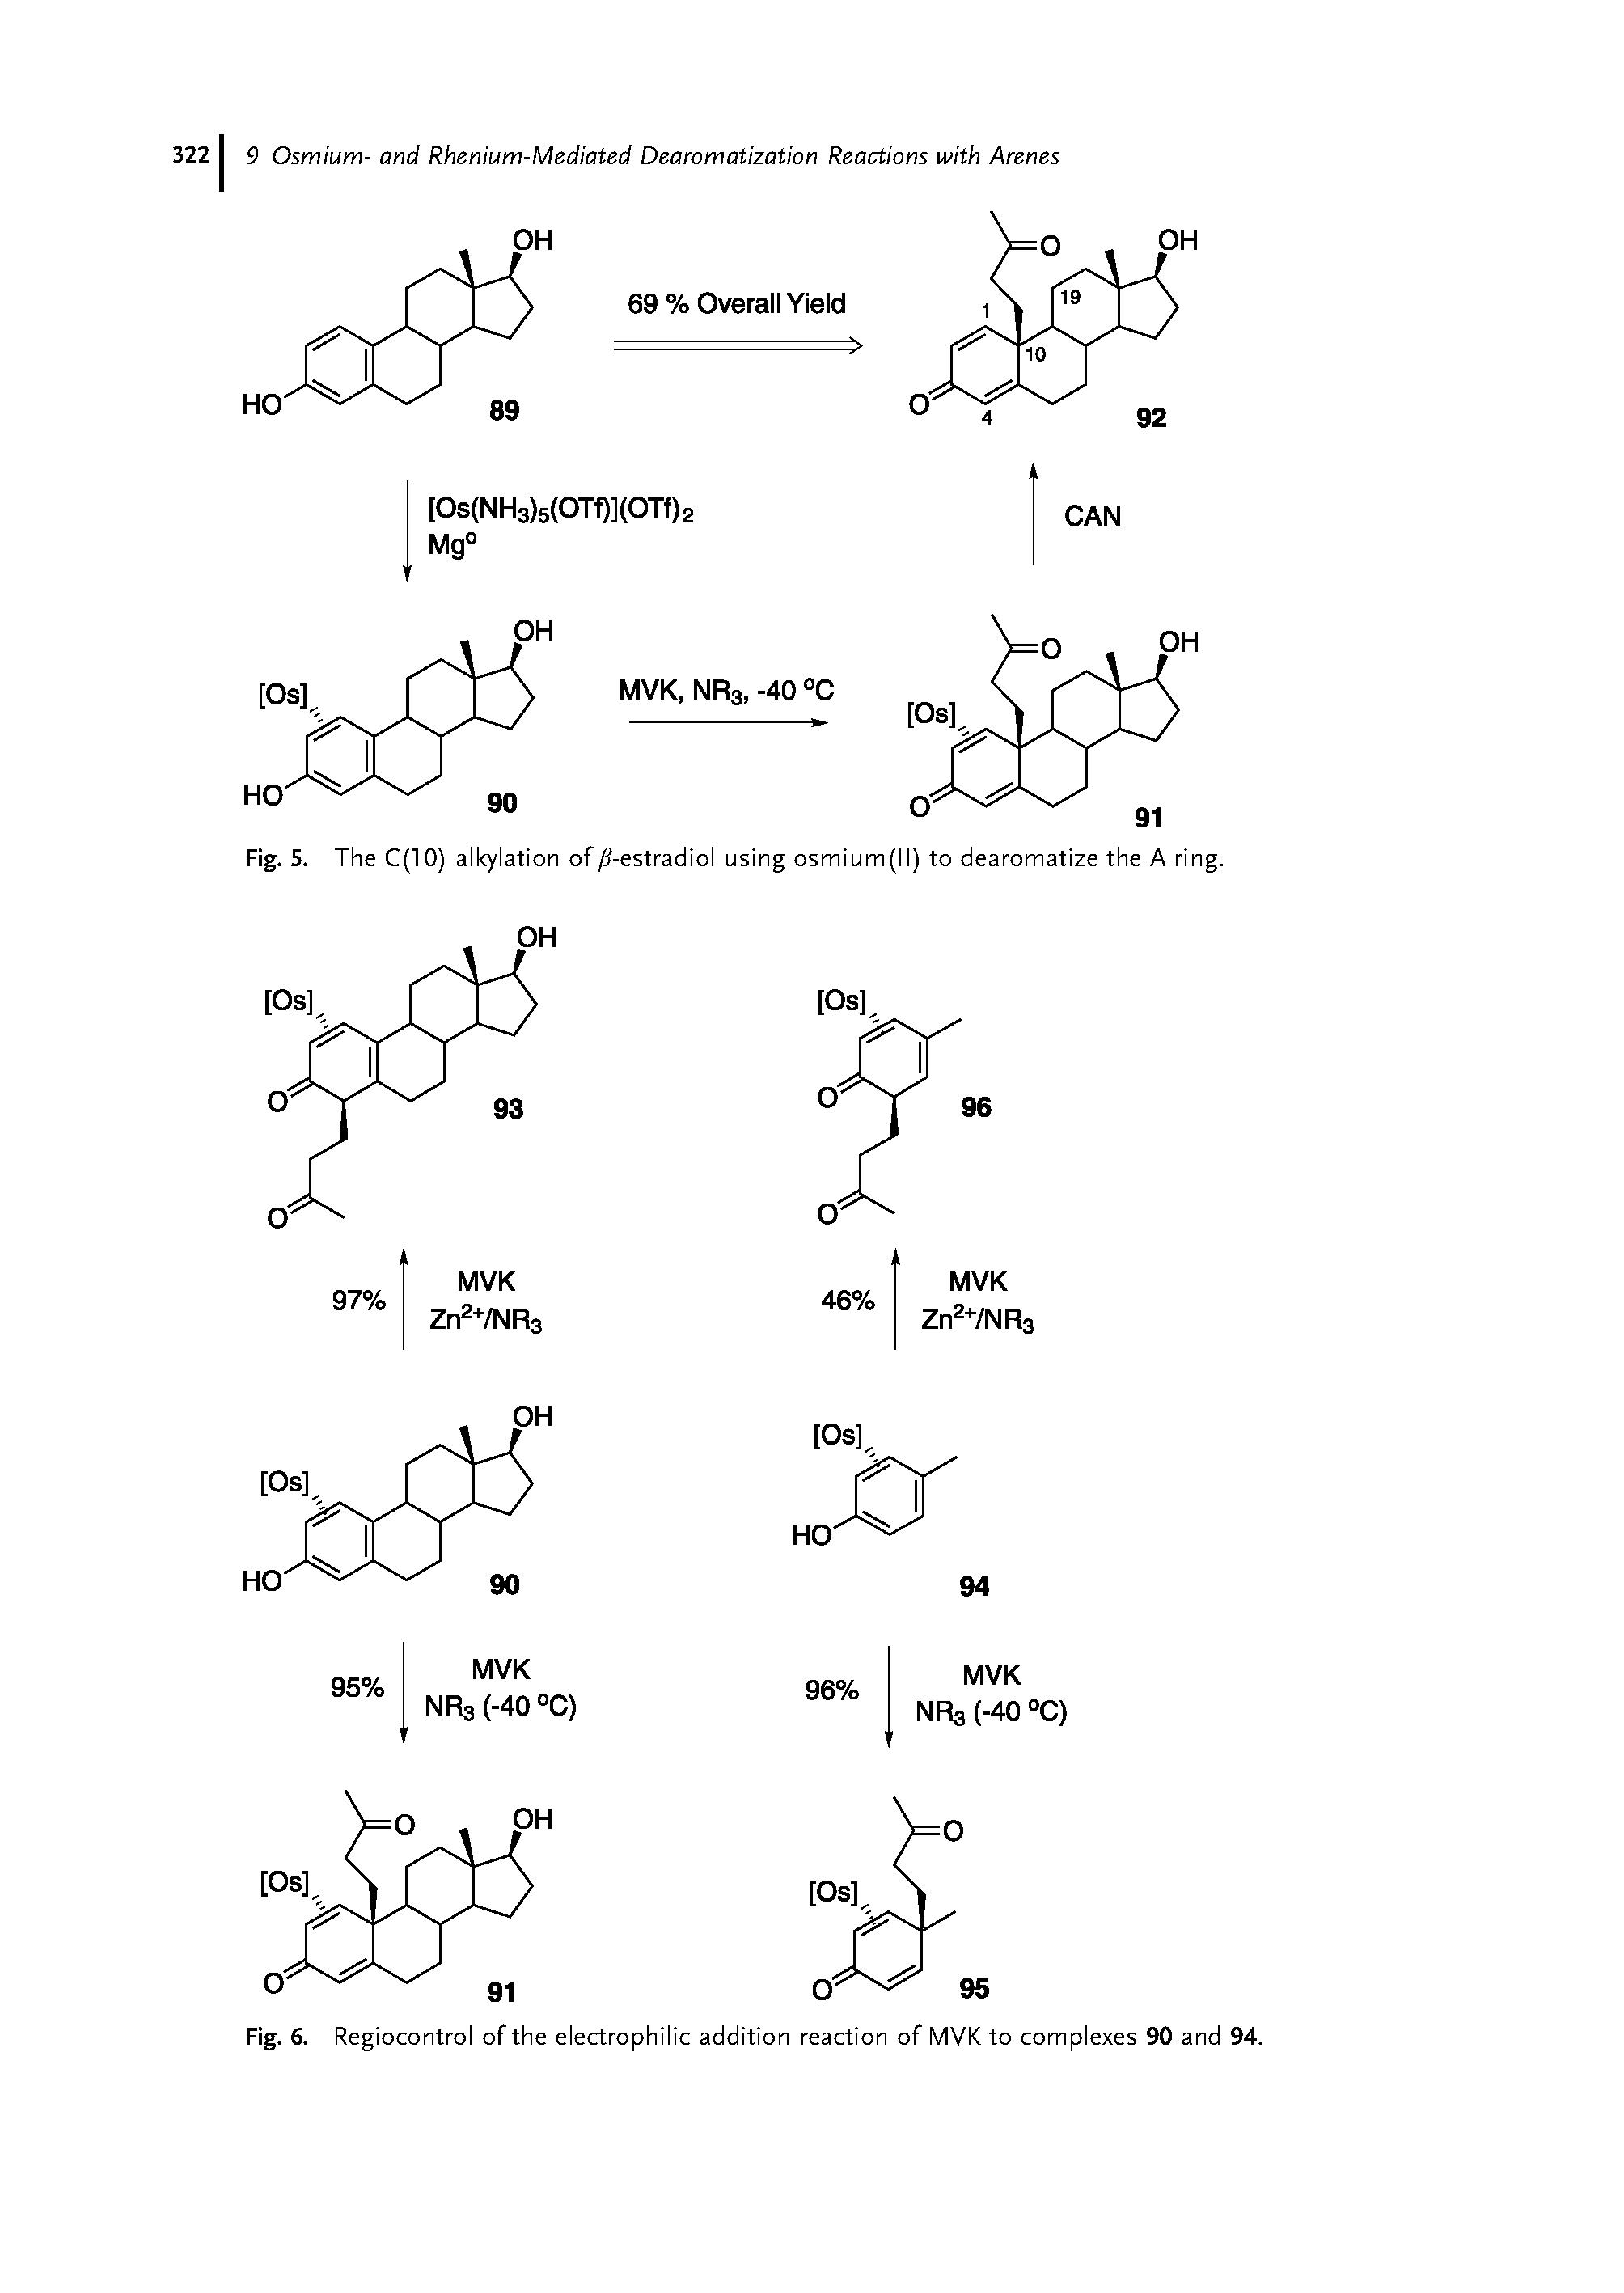 Fig. 5. The C(10) alkylation of -estradiol using osmium(ll) to dearomatize the A ring.